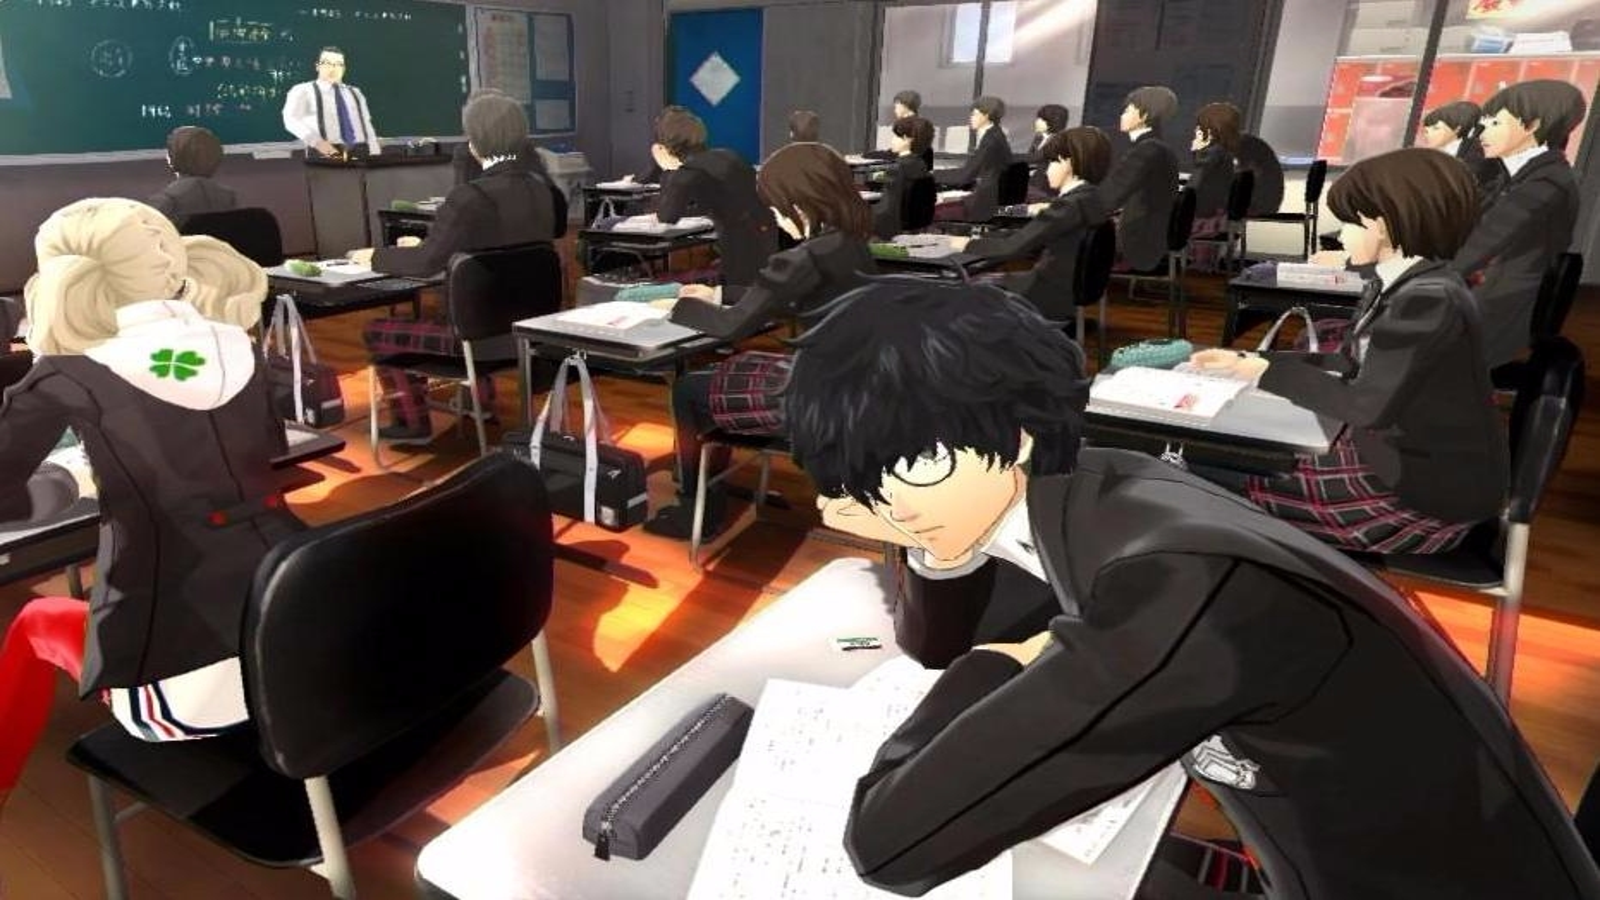 School Test and Quiz Answers - Persona 5 Guide - IGN